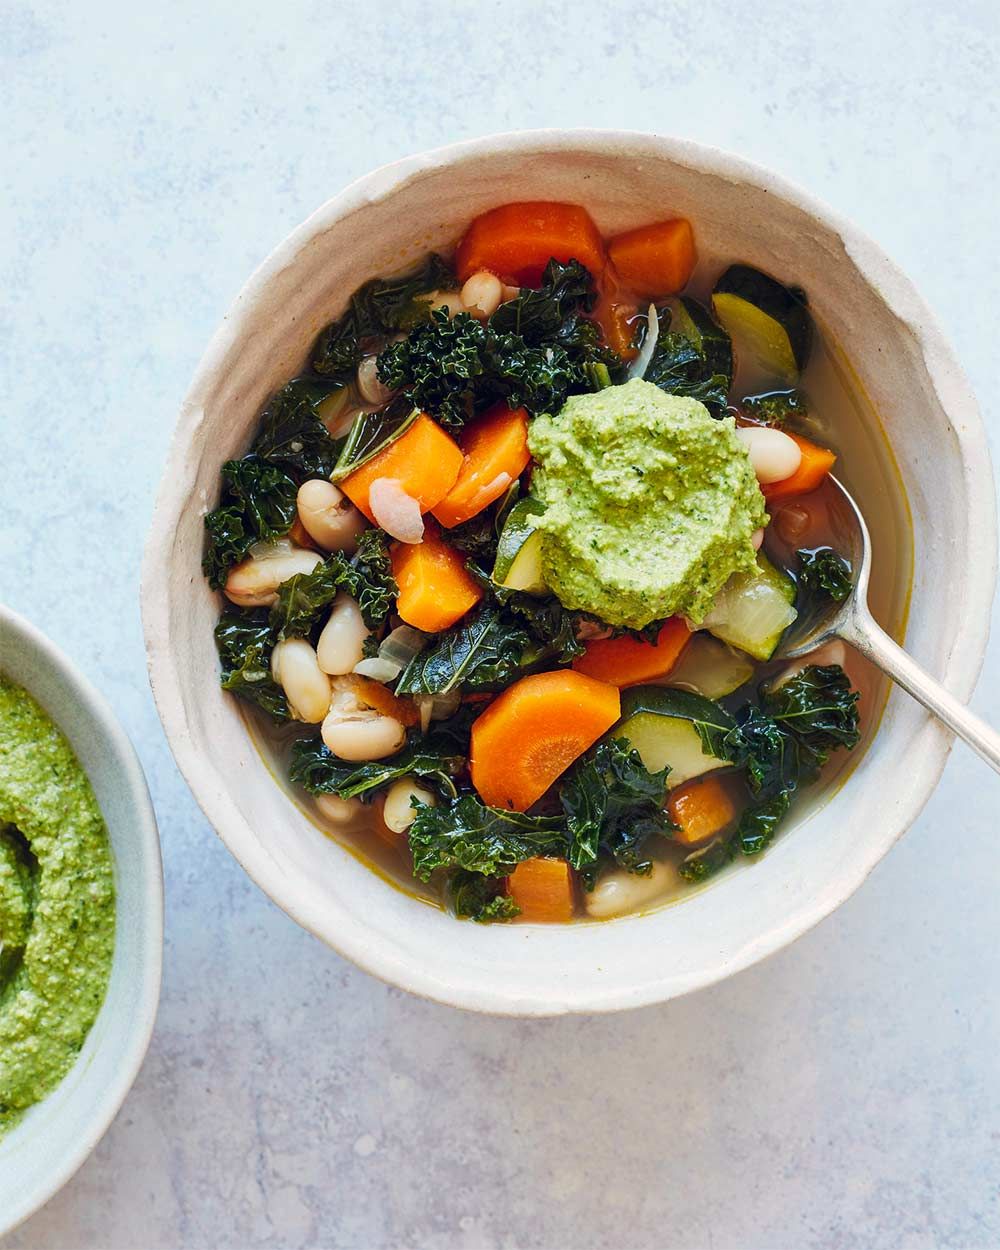 Amelia Freer's 10 recipes for nourishing your body this January - Soup - Humphrey Munson 